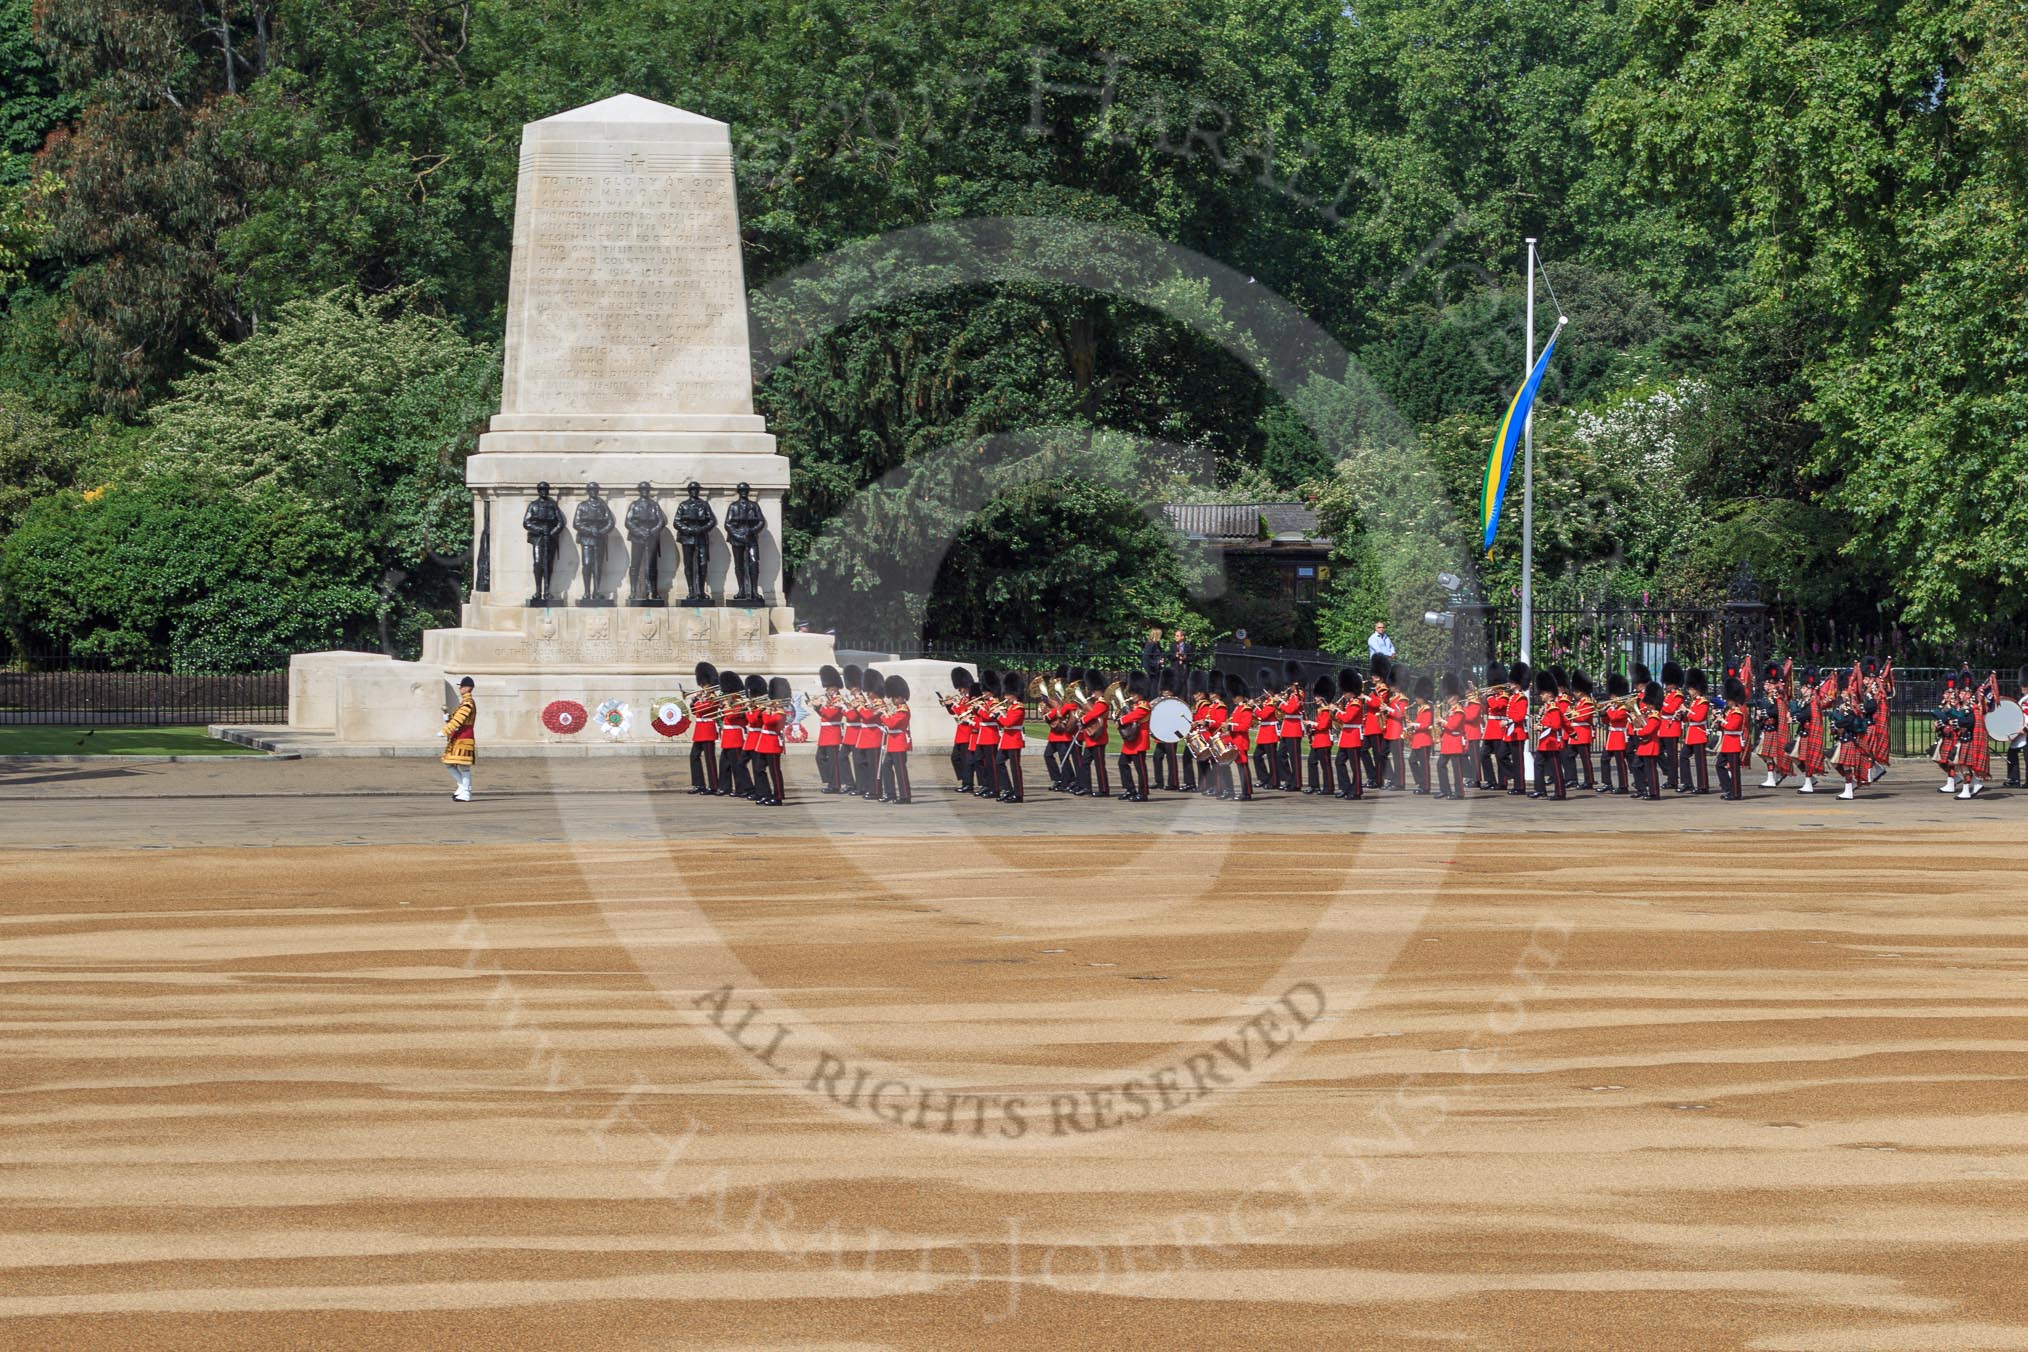 The Band of the Scots Guards marching past the Guards Memorial before Trooping the Colour 2018, The Queen's Birthday Parade at Horse Guards Parade, Westminster, London, 9 June 2018, 10:17.